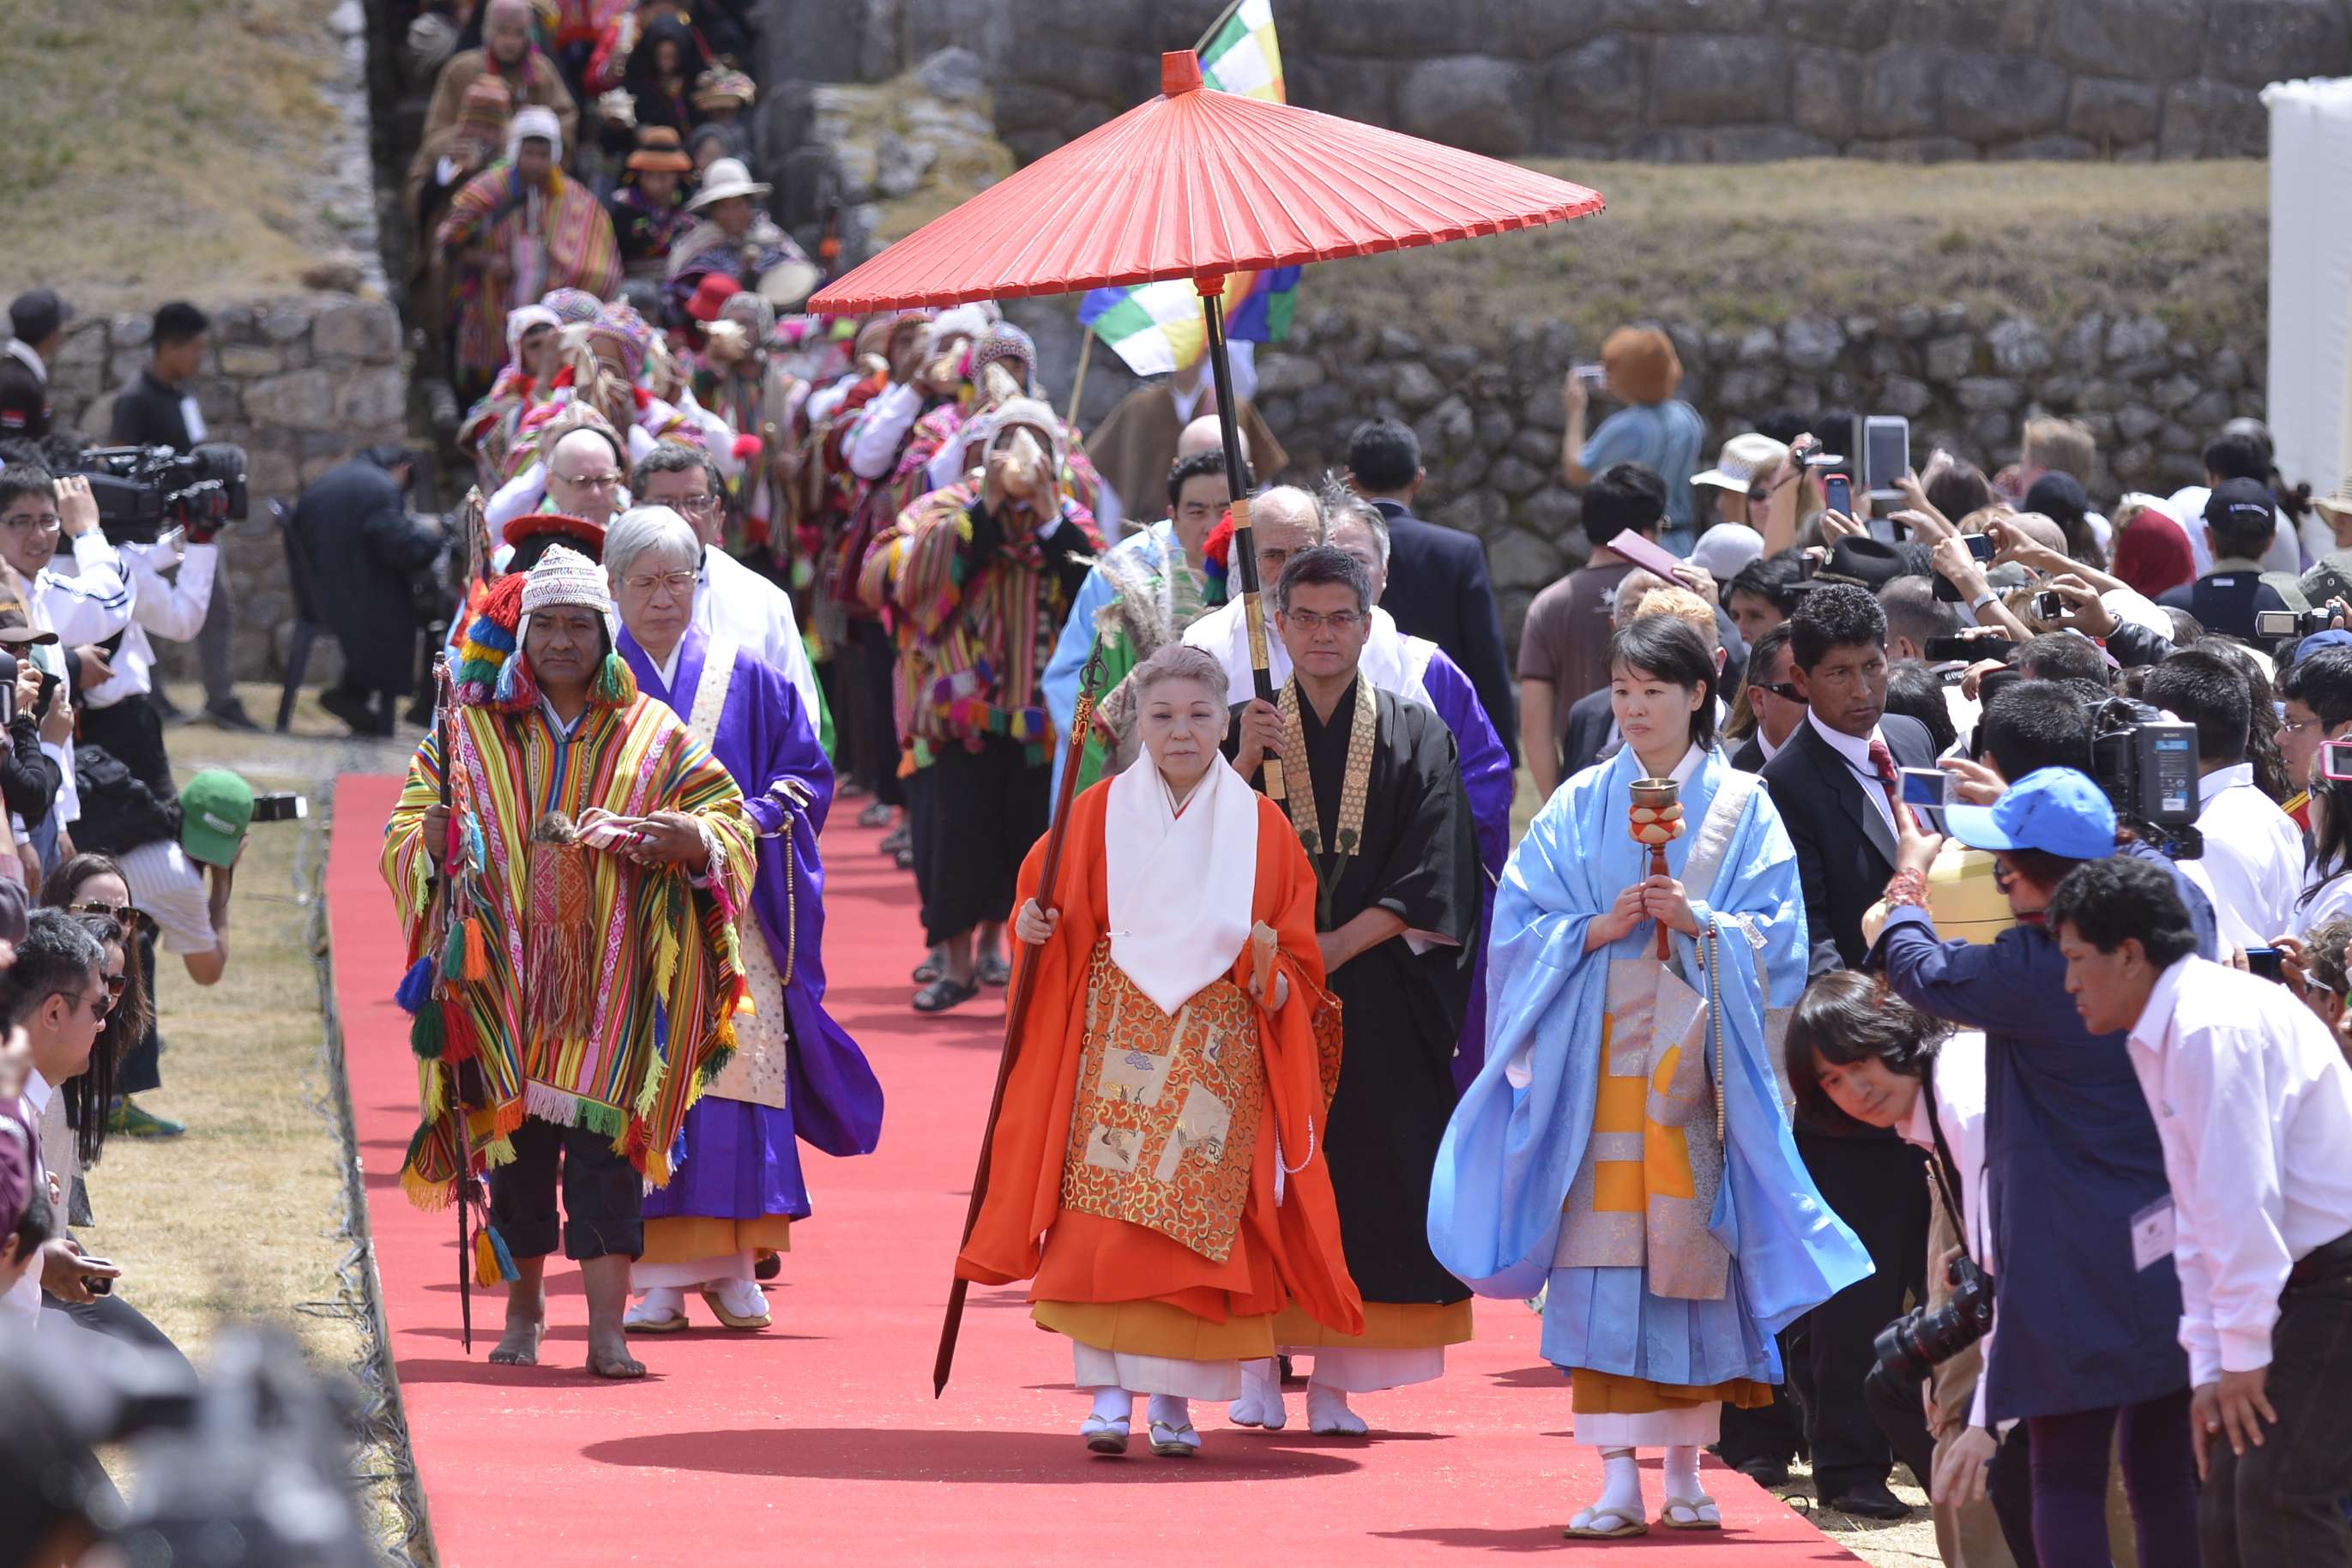 Her Holiness in ceremonial robes, carrying a staff, walks down an red-colored outdoor walkway accompanied by priests in robes and a Peruvian man in colorful native dress as a crowd looks on.